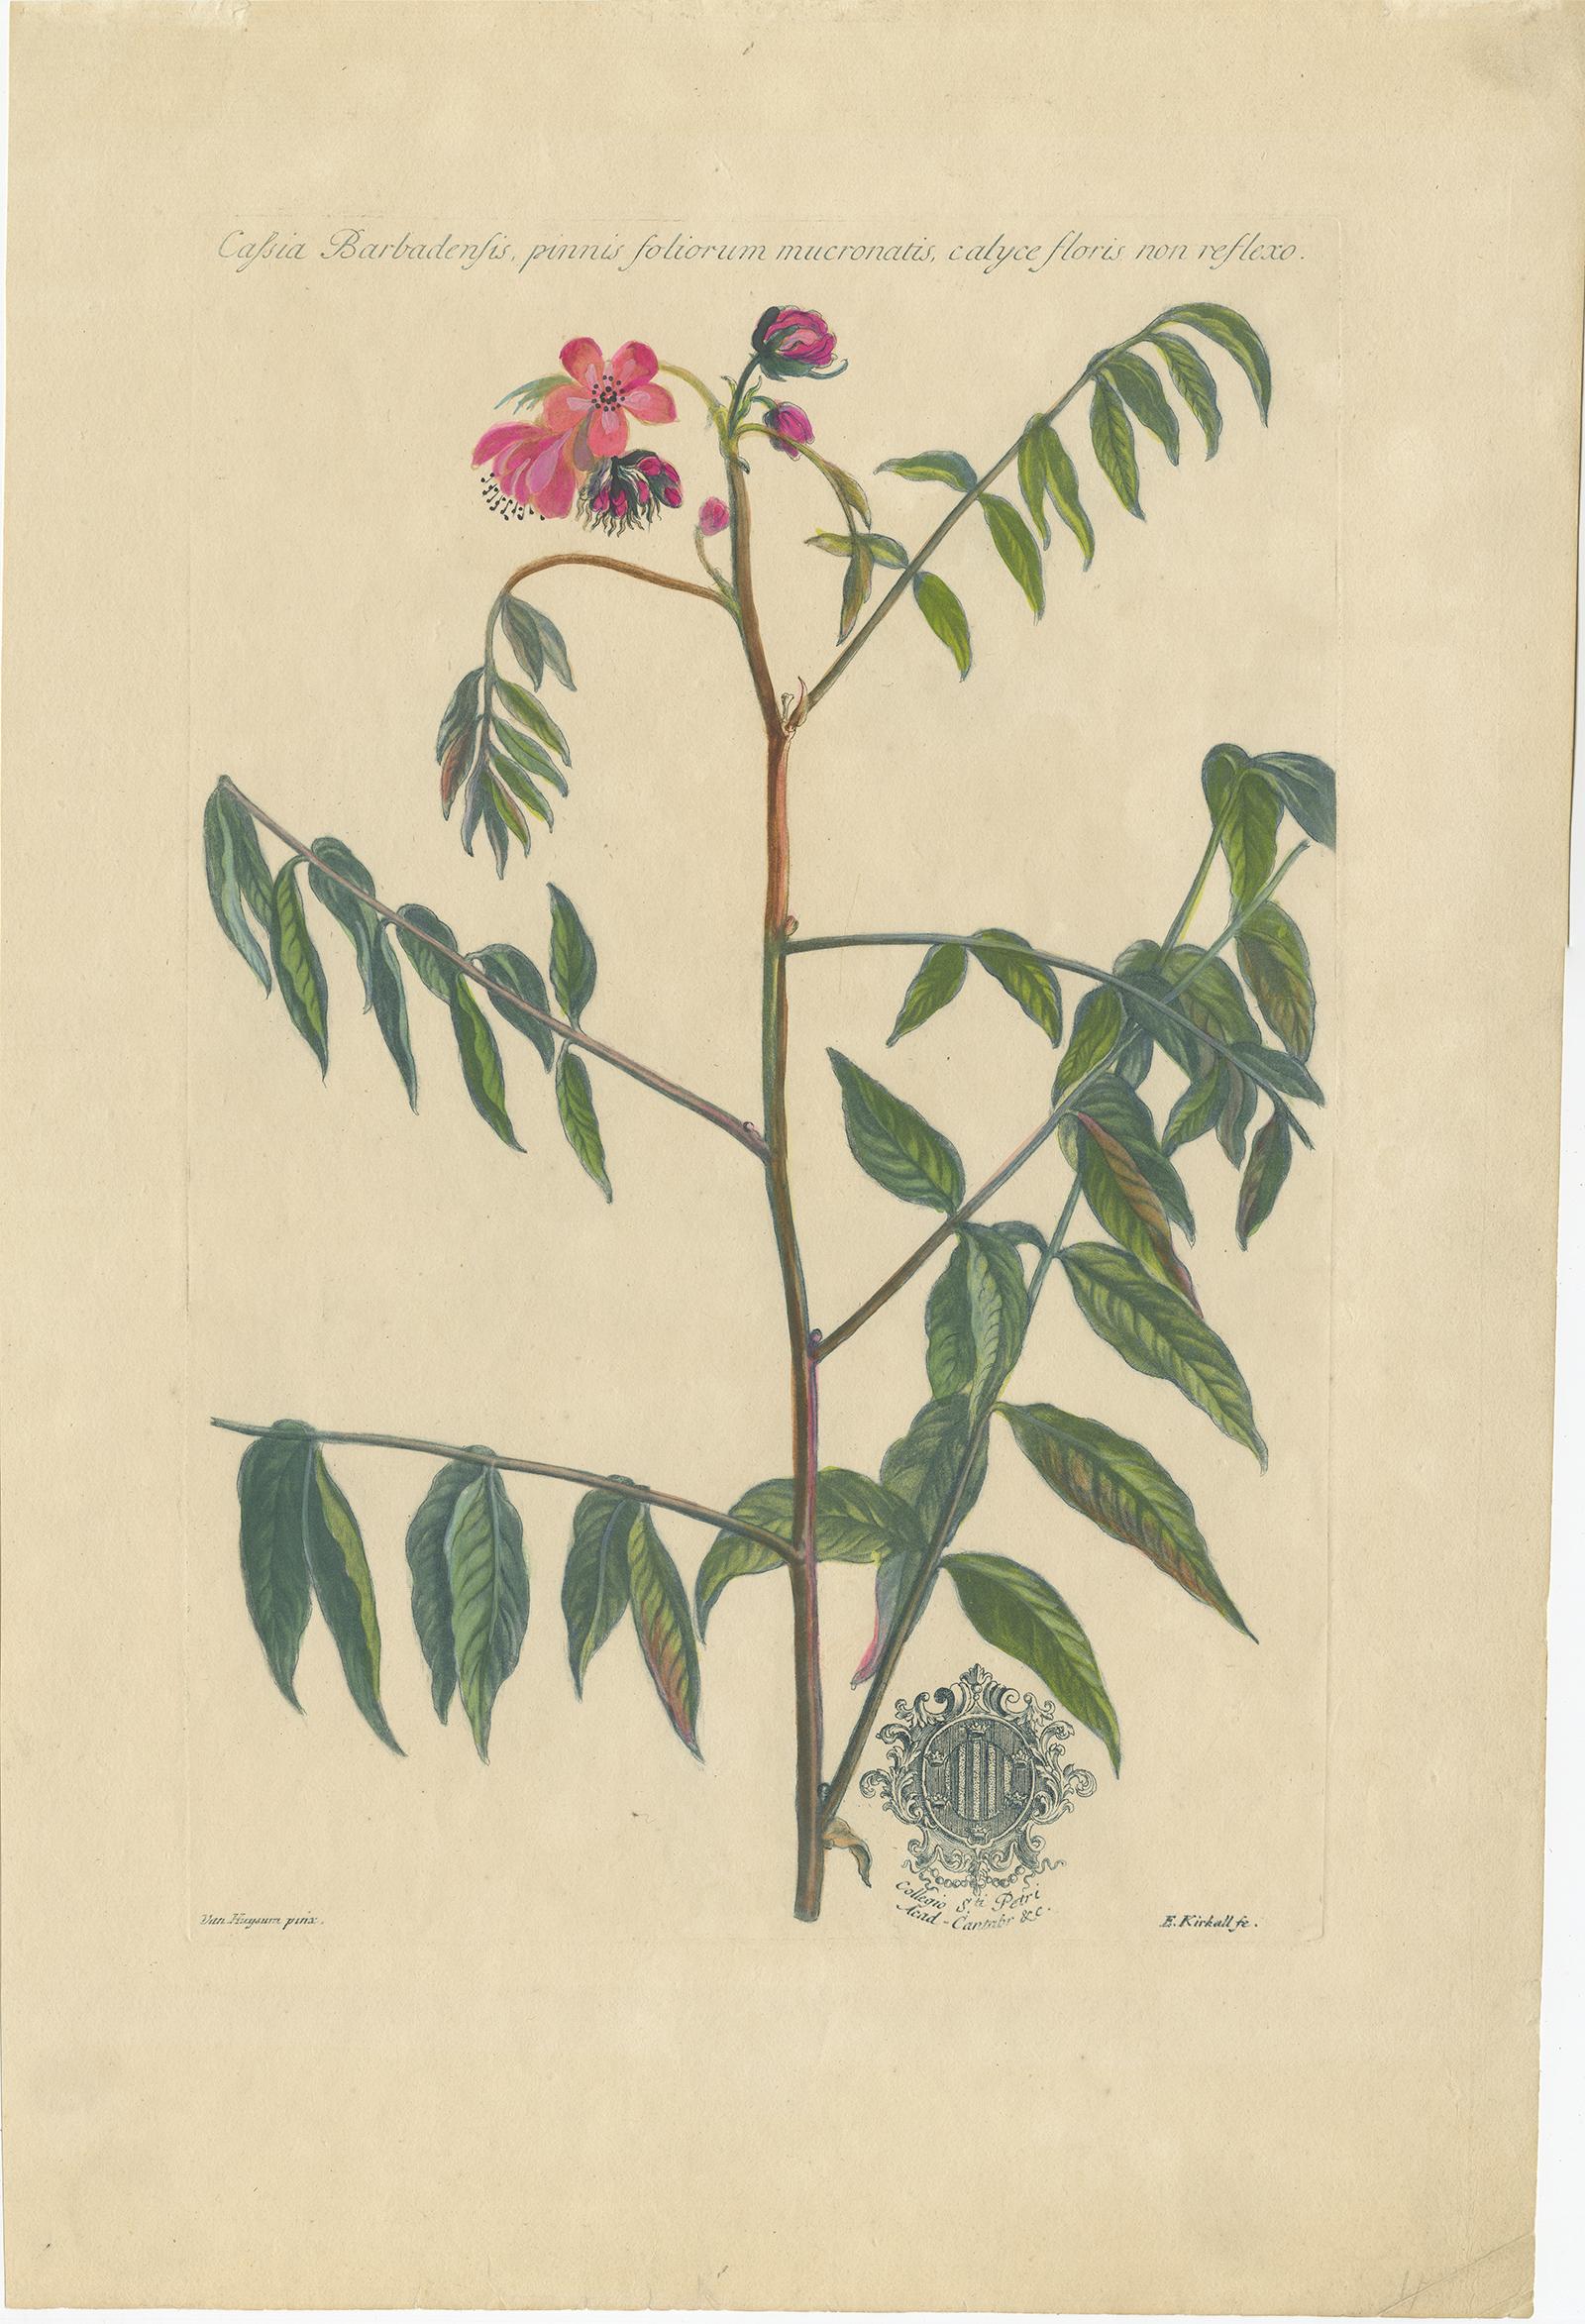 Set of two antique botany prints titled 'Cassia Barbadensis (..)' and 'Cassia Marilandica (..)'. It depicts two cassia plant species. These prints originate from 'Historia plantarum rariorum' by John Martyn.